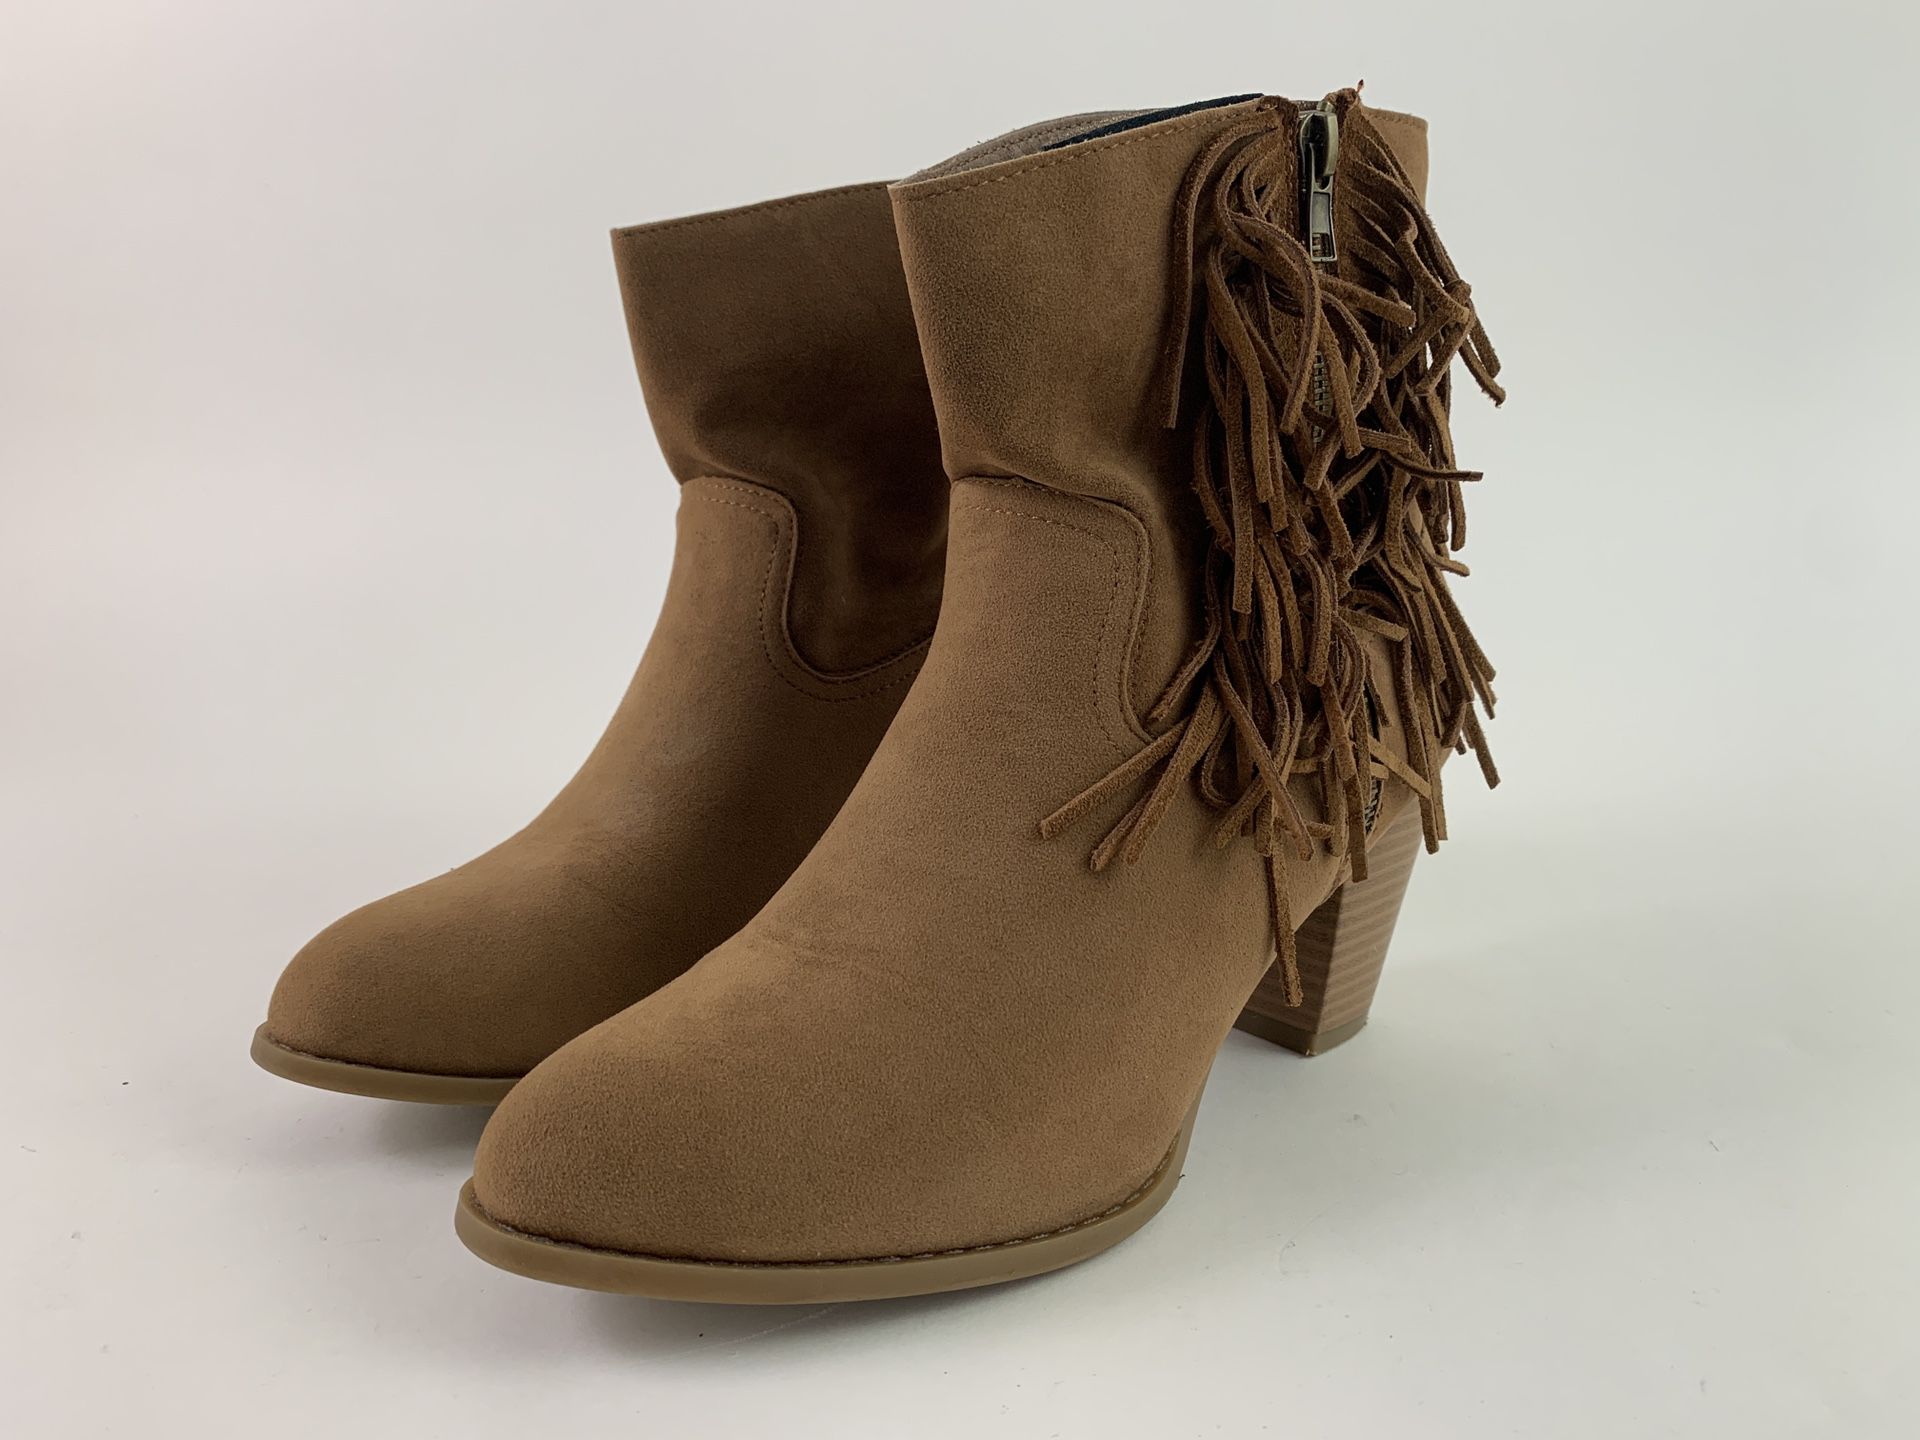 Women's Fringe Ankle Boots Size 8.5 M Brown Booties